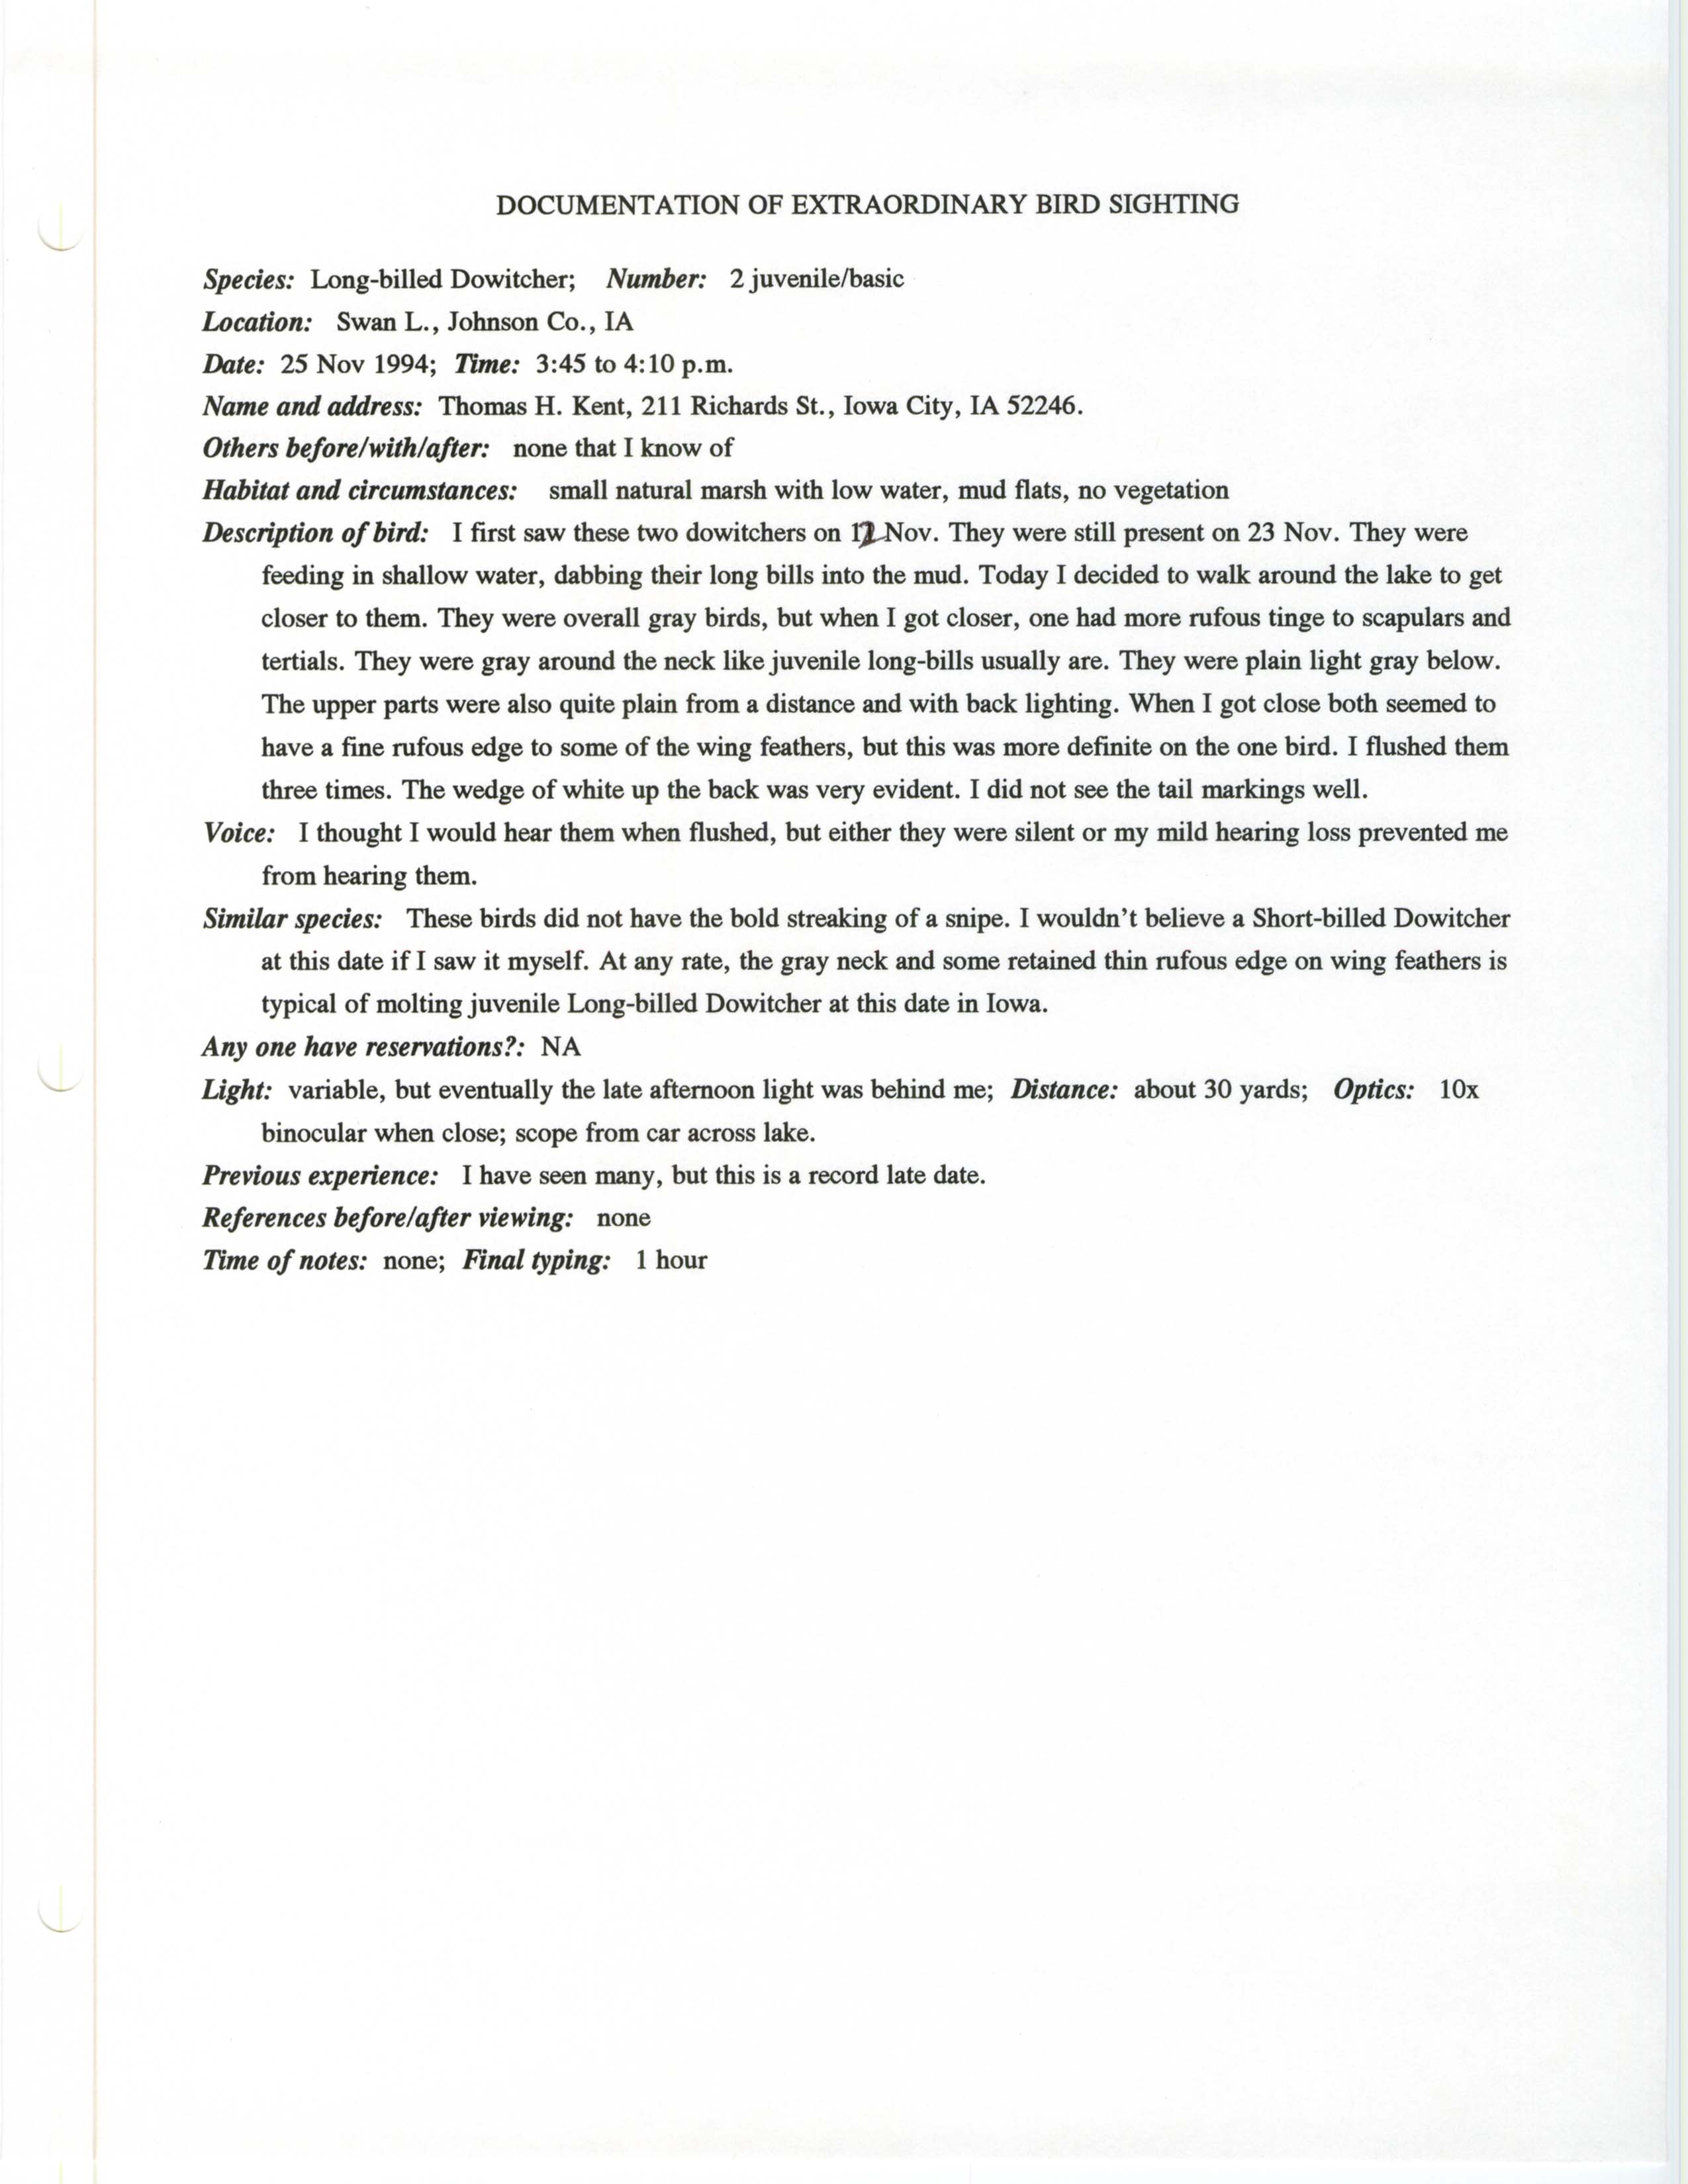 Rare bird documentation form for Long-billed Dowitcher at Swan Lake, 1994